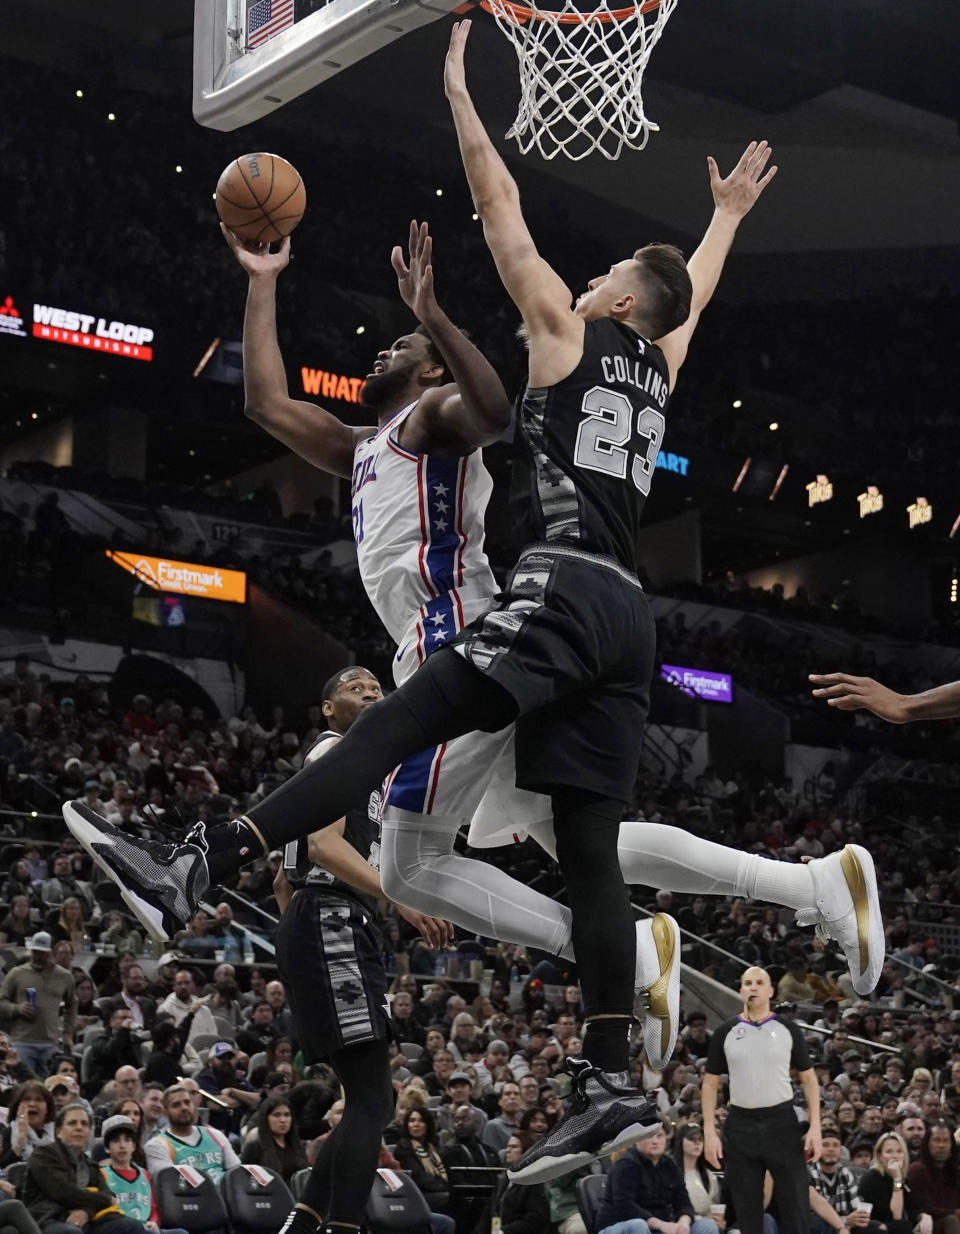 Philadelphia 76ers center Joel Embiid (21) is fouled as he drives to the basket against San Antonio Spurs forward Zach Collins (23) during the first half of an NBA basketball game in San Antonio, Friday, Feb. 3, 2023. (AP Photo/Eric Gay)